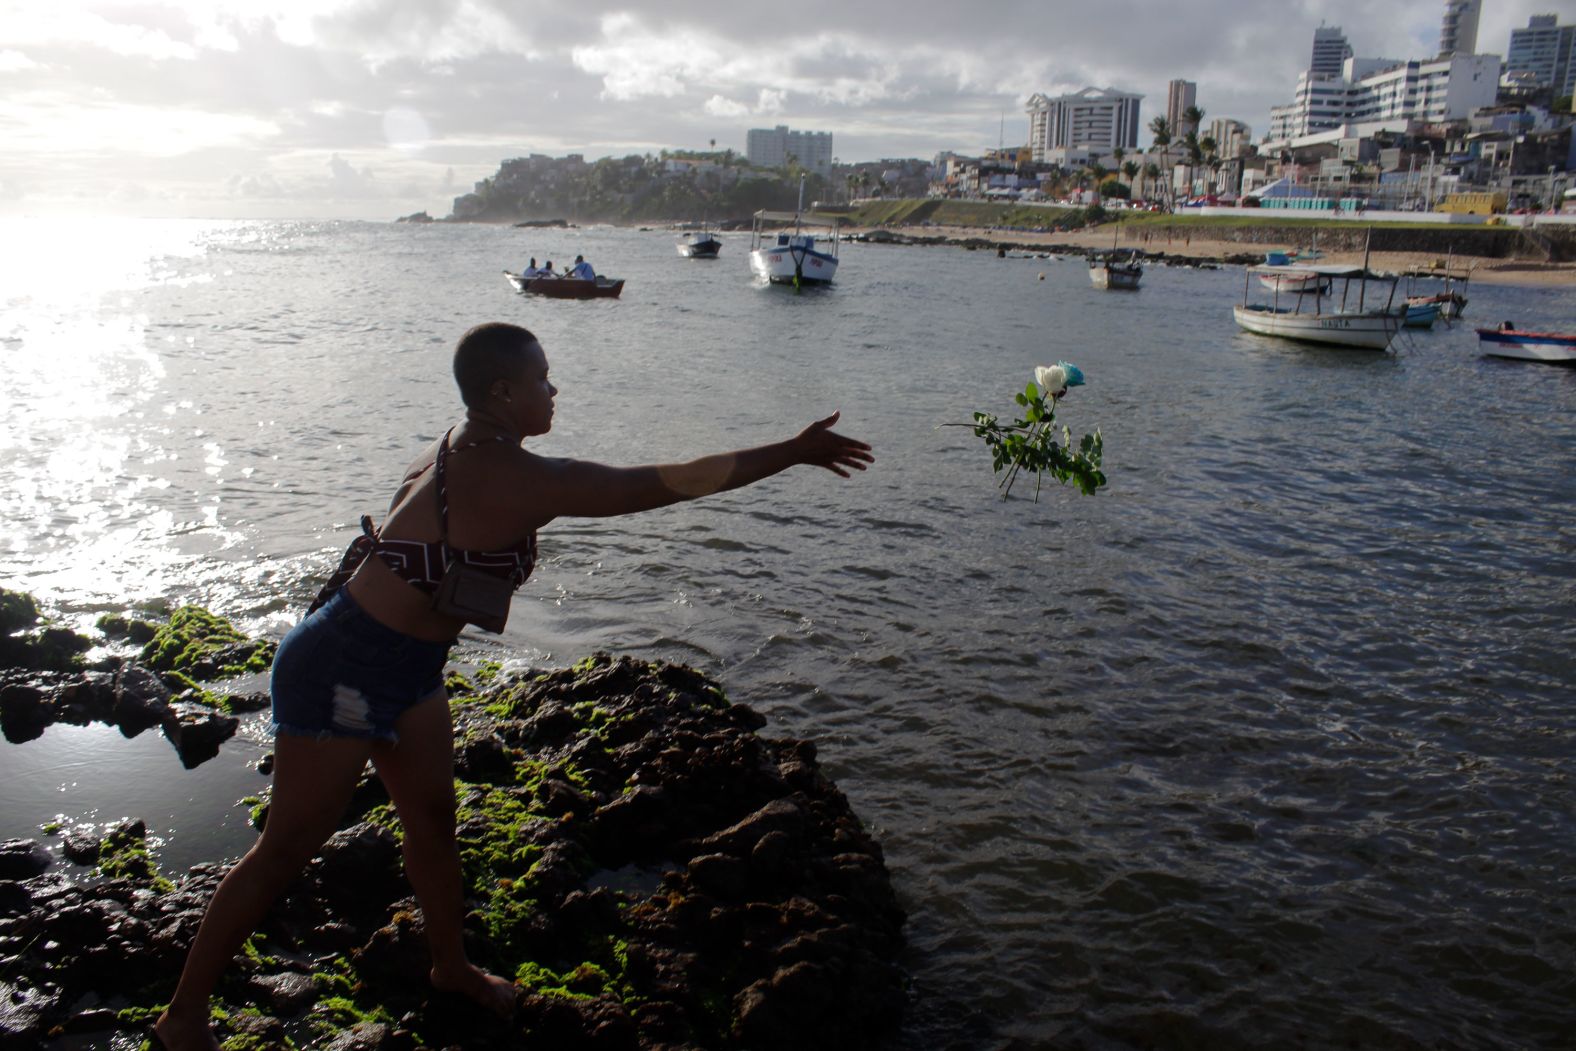 A devotee in Salvador, Brazil, throws flowers as offerings to the sea goddess Iemanjá on Wednesday, February 1. Iemanjá is revered across many faiths in Brazil. <a href="index.php?page=&url=http%3A%2F%2Fwww.cnn.com%2F2023%2F01%2F26%2Fworld%2Fgallery%2Fphotos-this-week-january-19-january-26%2Findex.html" target="_blank">See last week in 33 photos</a>.